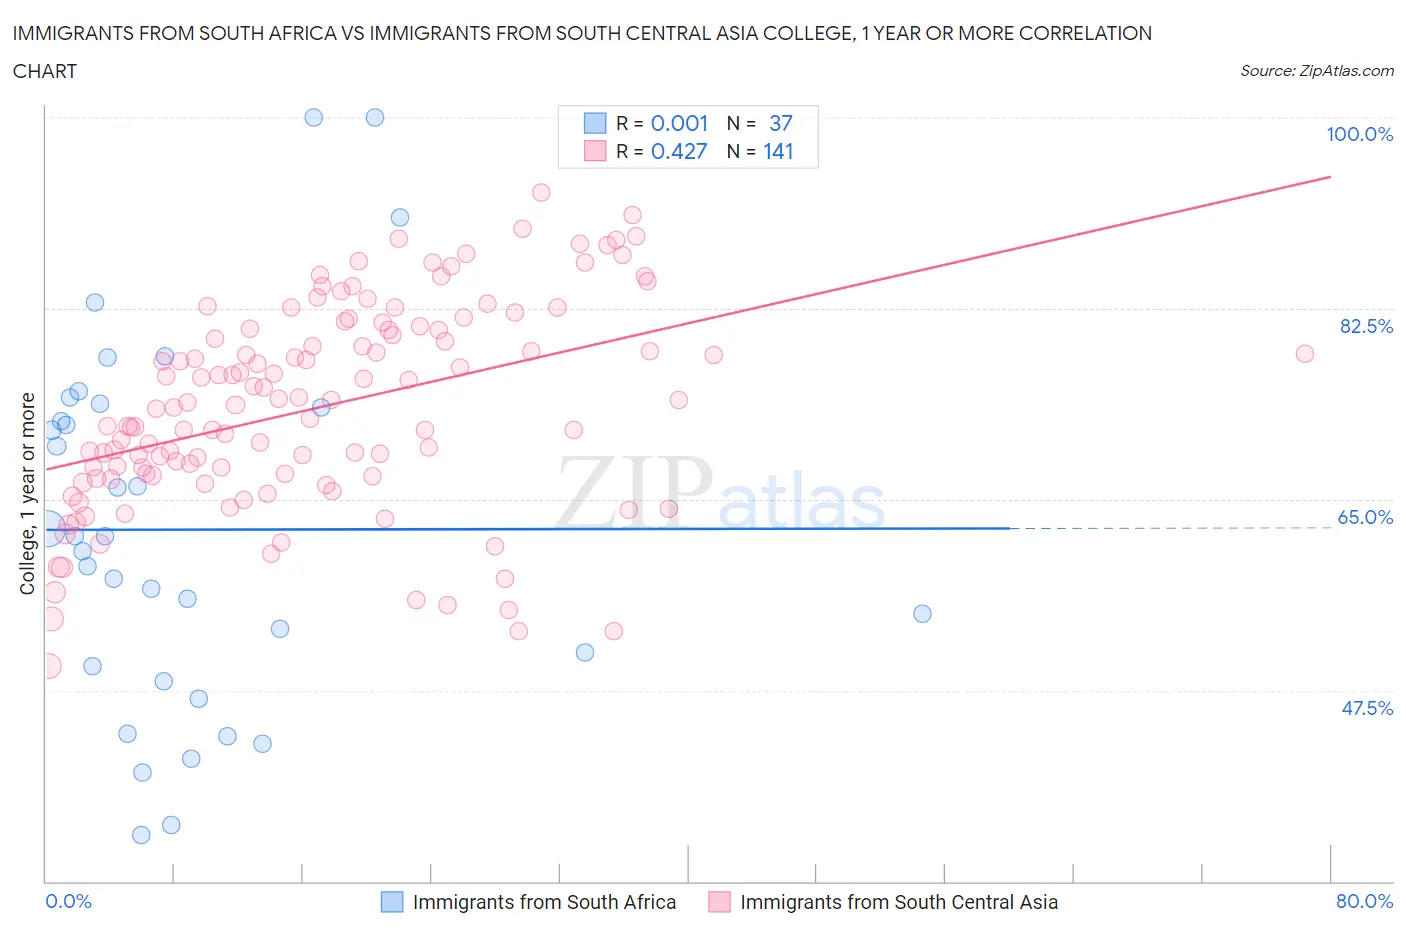 Immigrants from South Africa vs Immigrants from South Central Asia College, 1 year or more